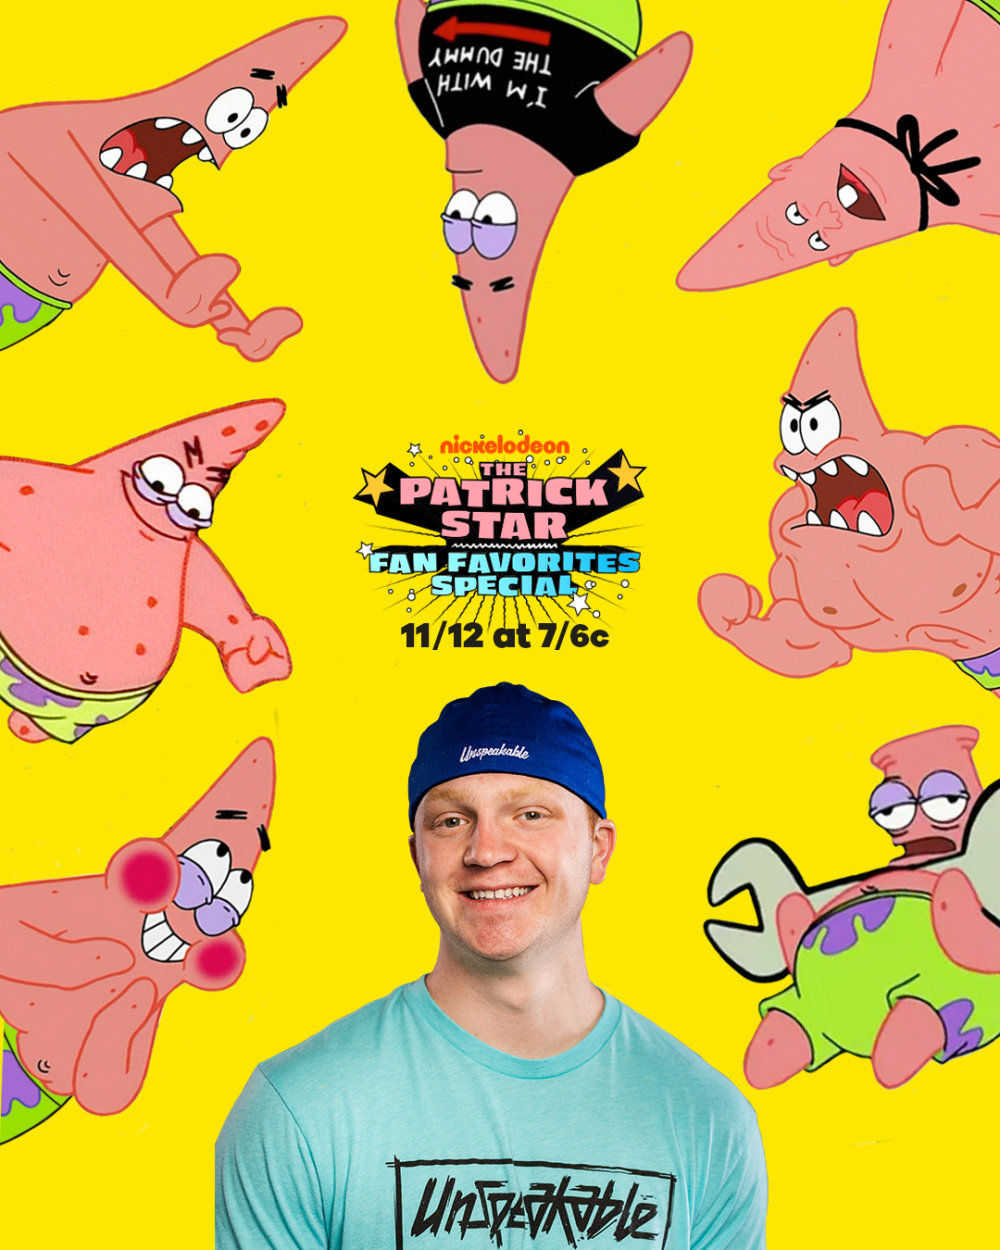 The Patrick Star Fan Favorites Special with Unspeakable